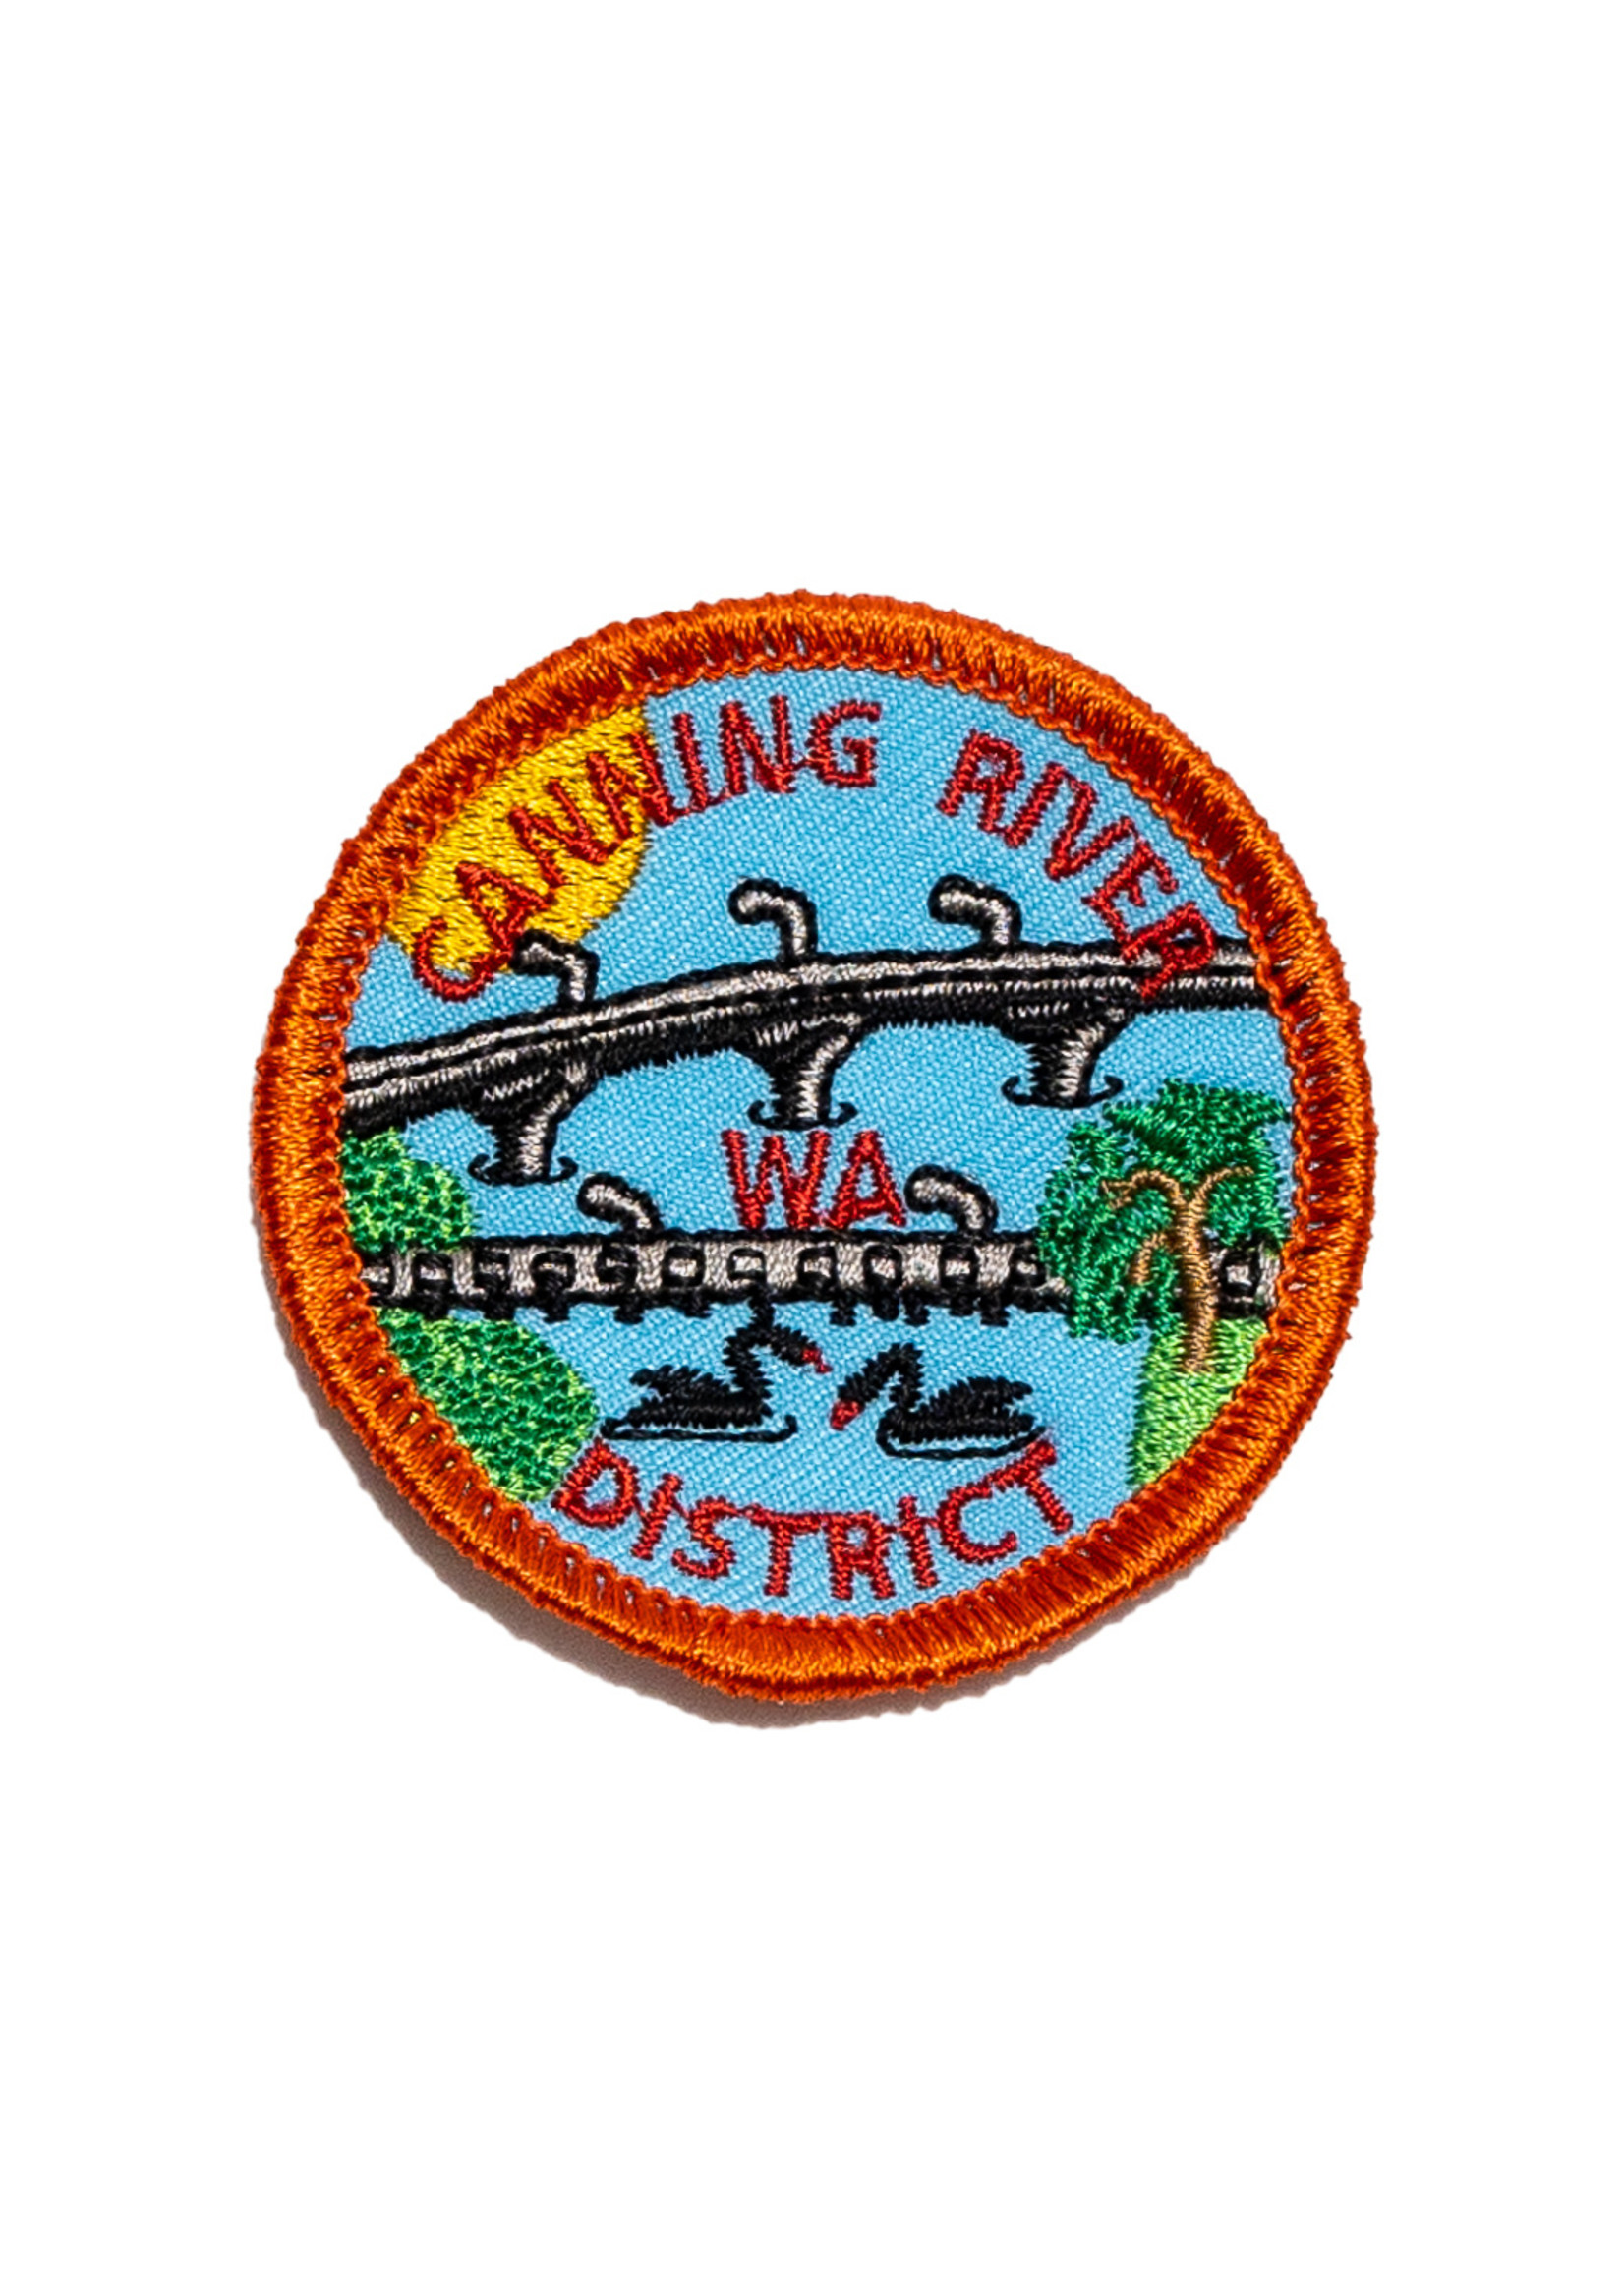 District Badges - Perth South